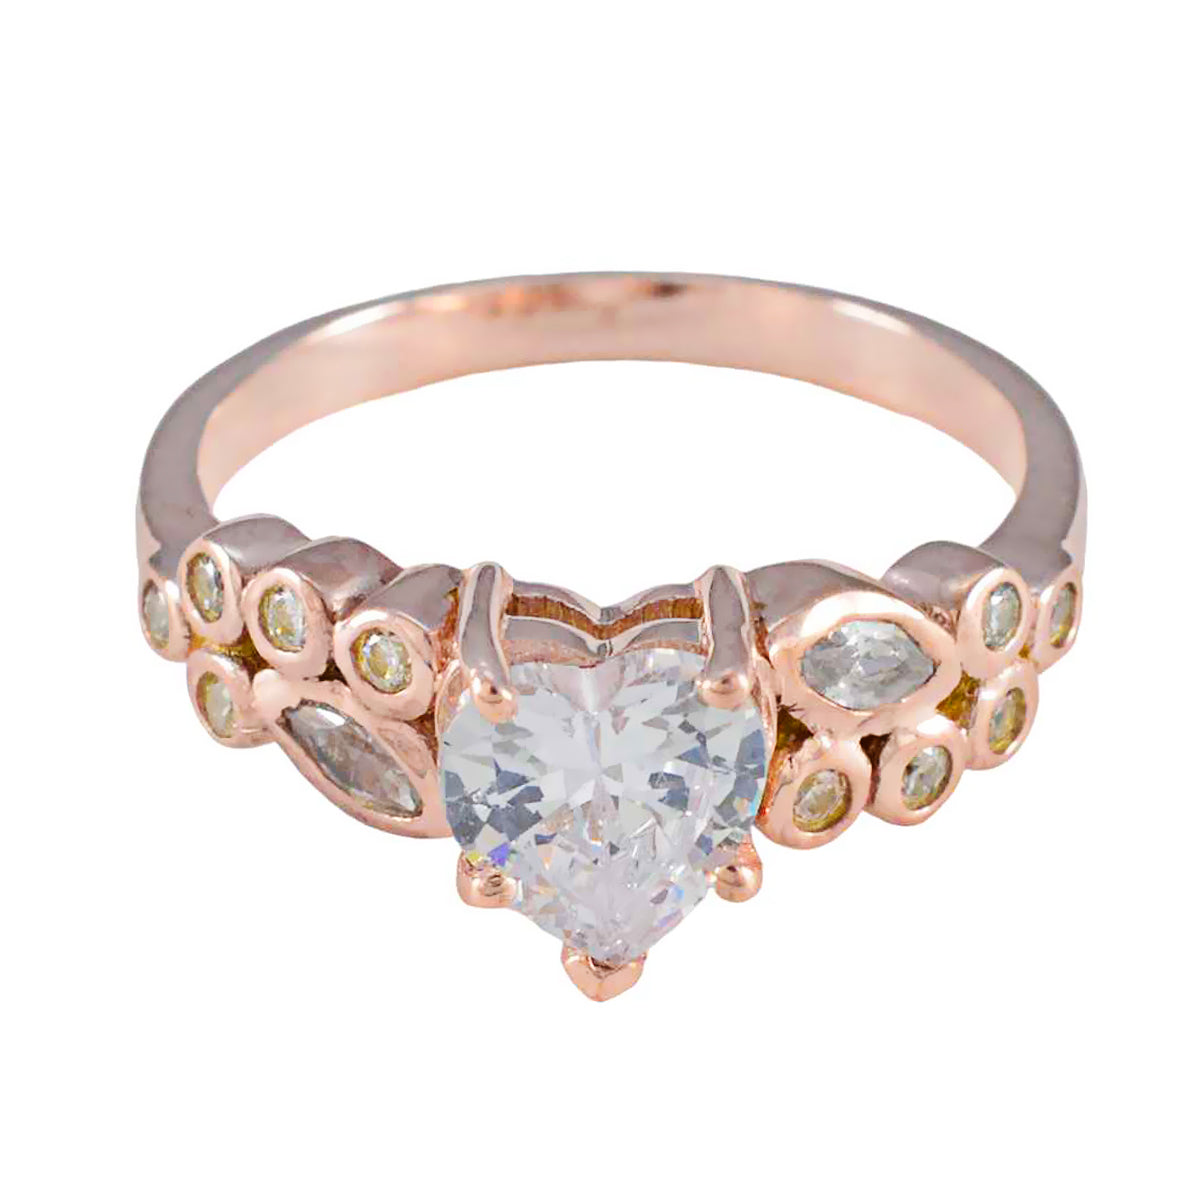 Riyo Choice Silver Ring With Rose Gold Plating White CZ Stone Heart Shape Prong Setting Bridal Jewelry Christmas Ring